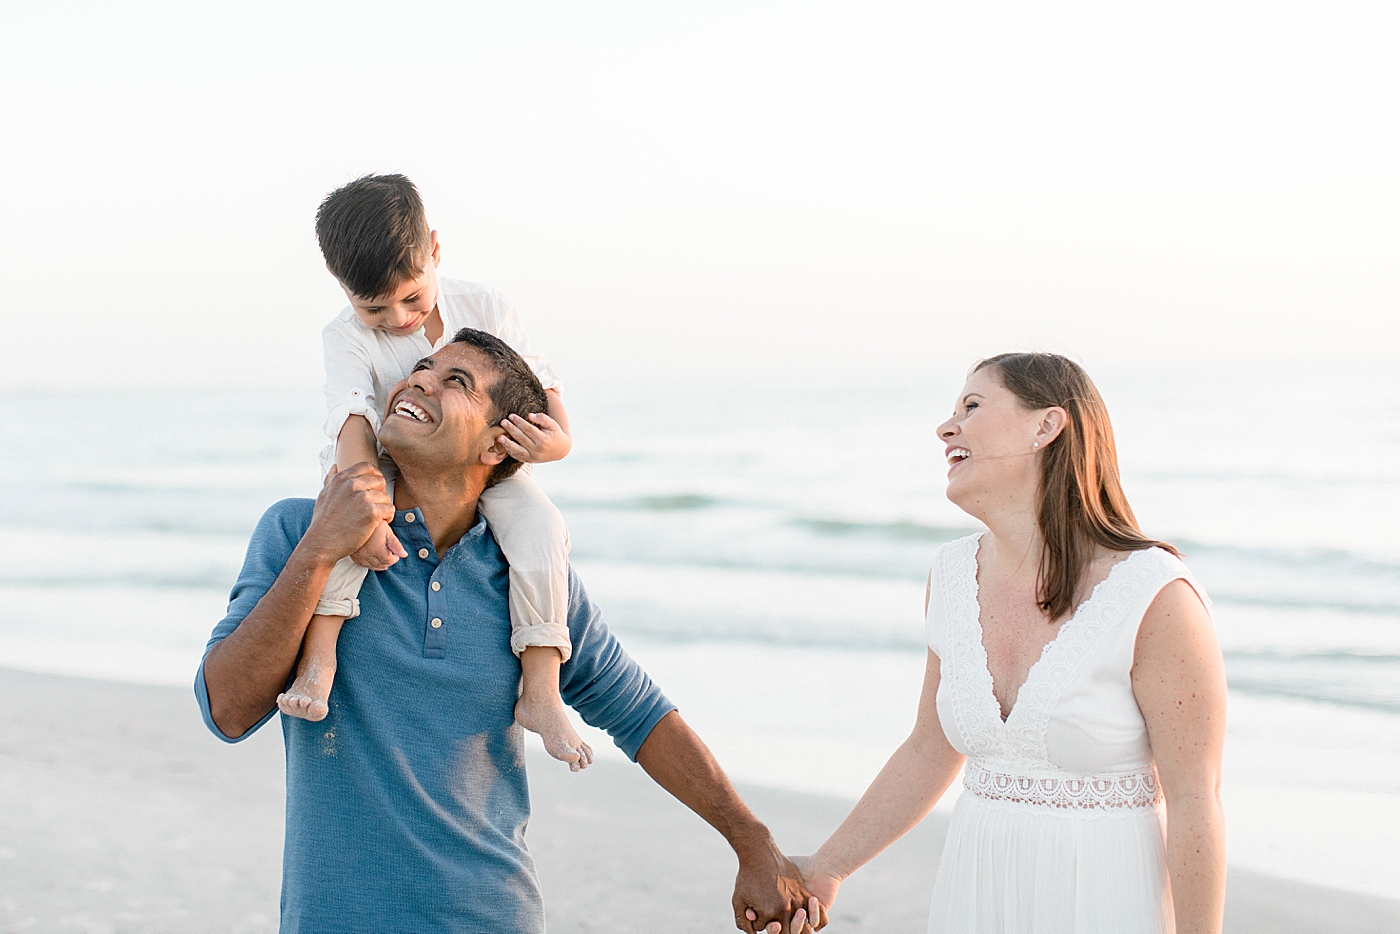 Fun moment between Mom, Dad and Son on the beach. Photos by Brittany Elise Photography.